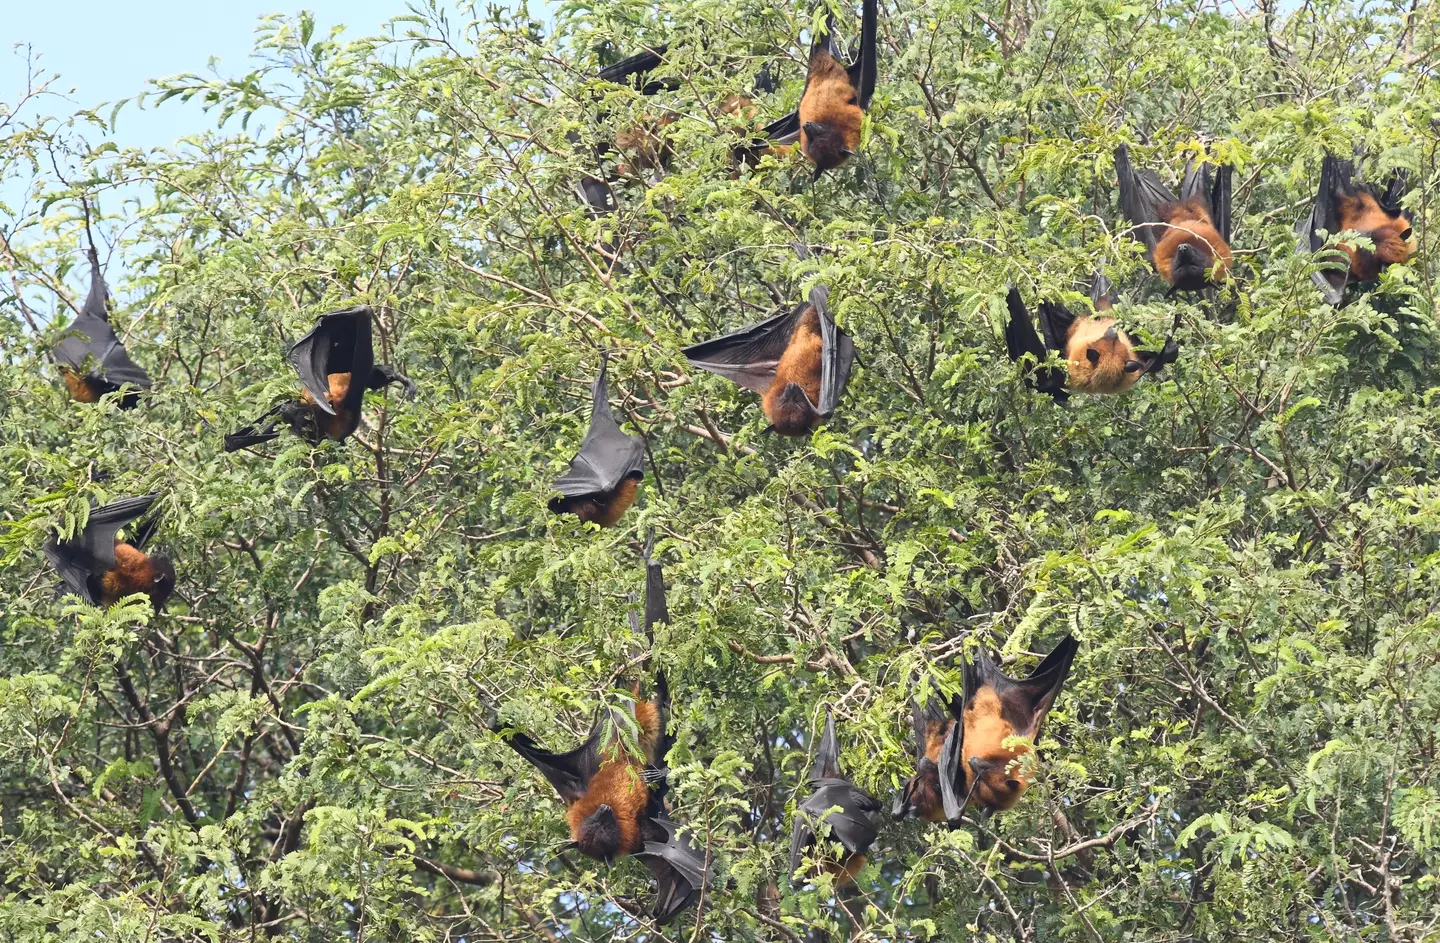 Fly Foxes roosting in trees. (Sumit Saraswat/Pacific Press/LightRocket via Getty Images)